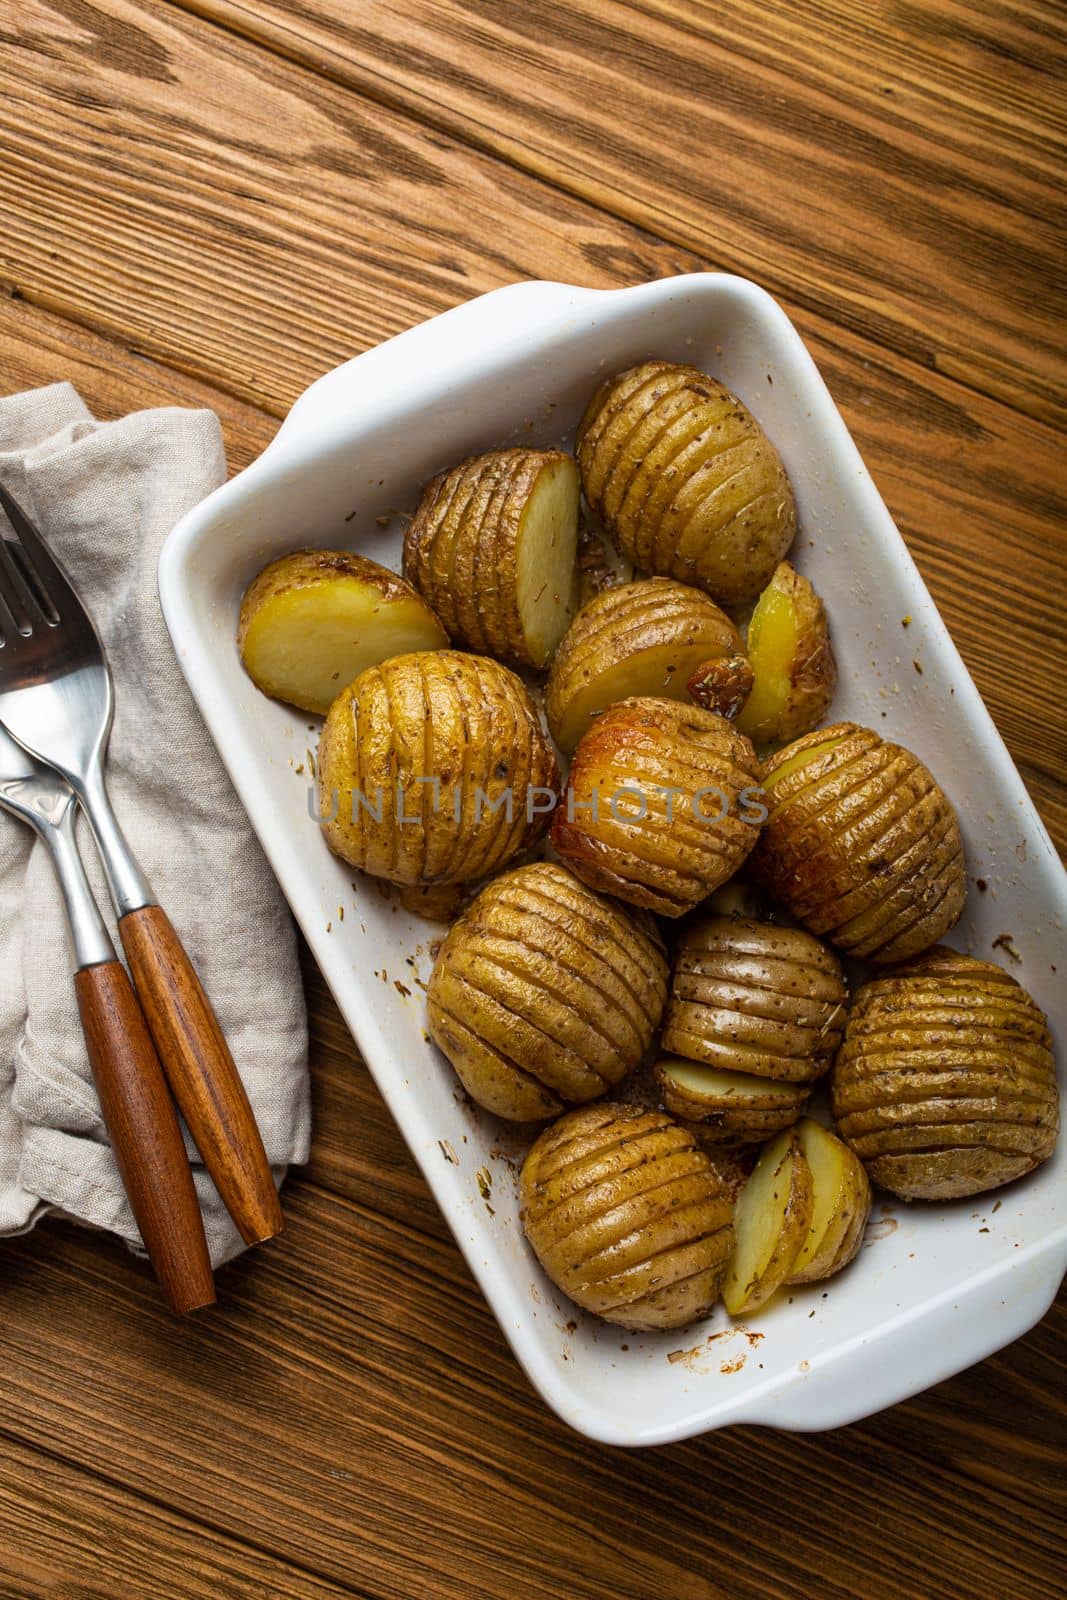 Hasselback baked potatoes in white ceramic casserole dish on wooden rustic table background by its_al_dente